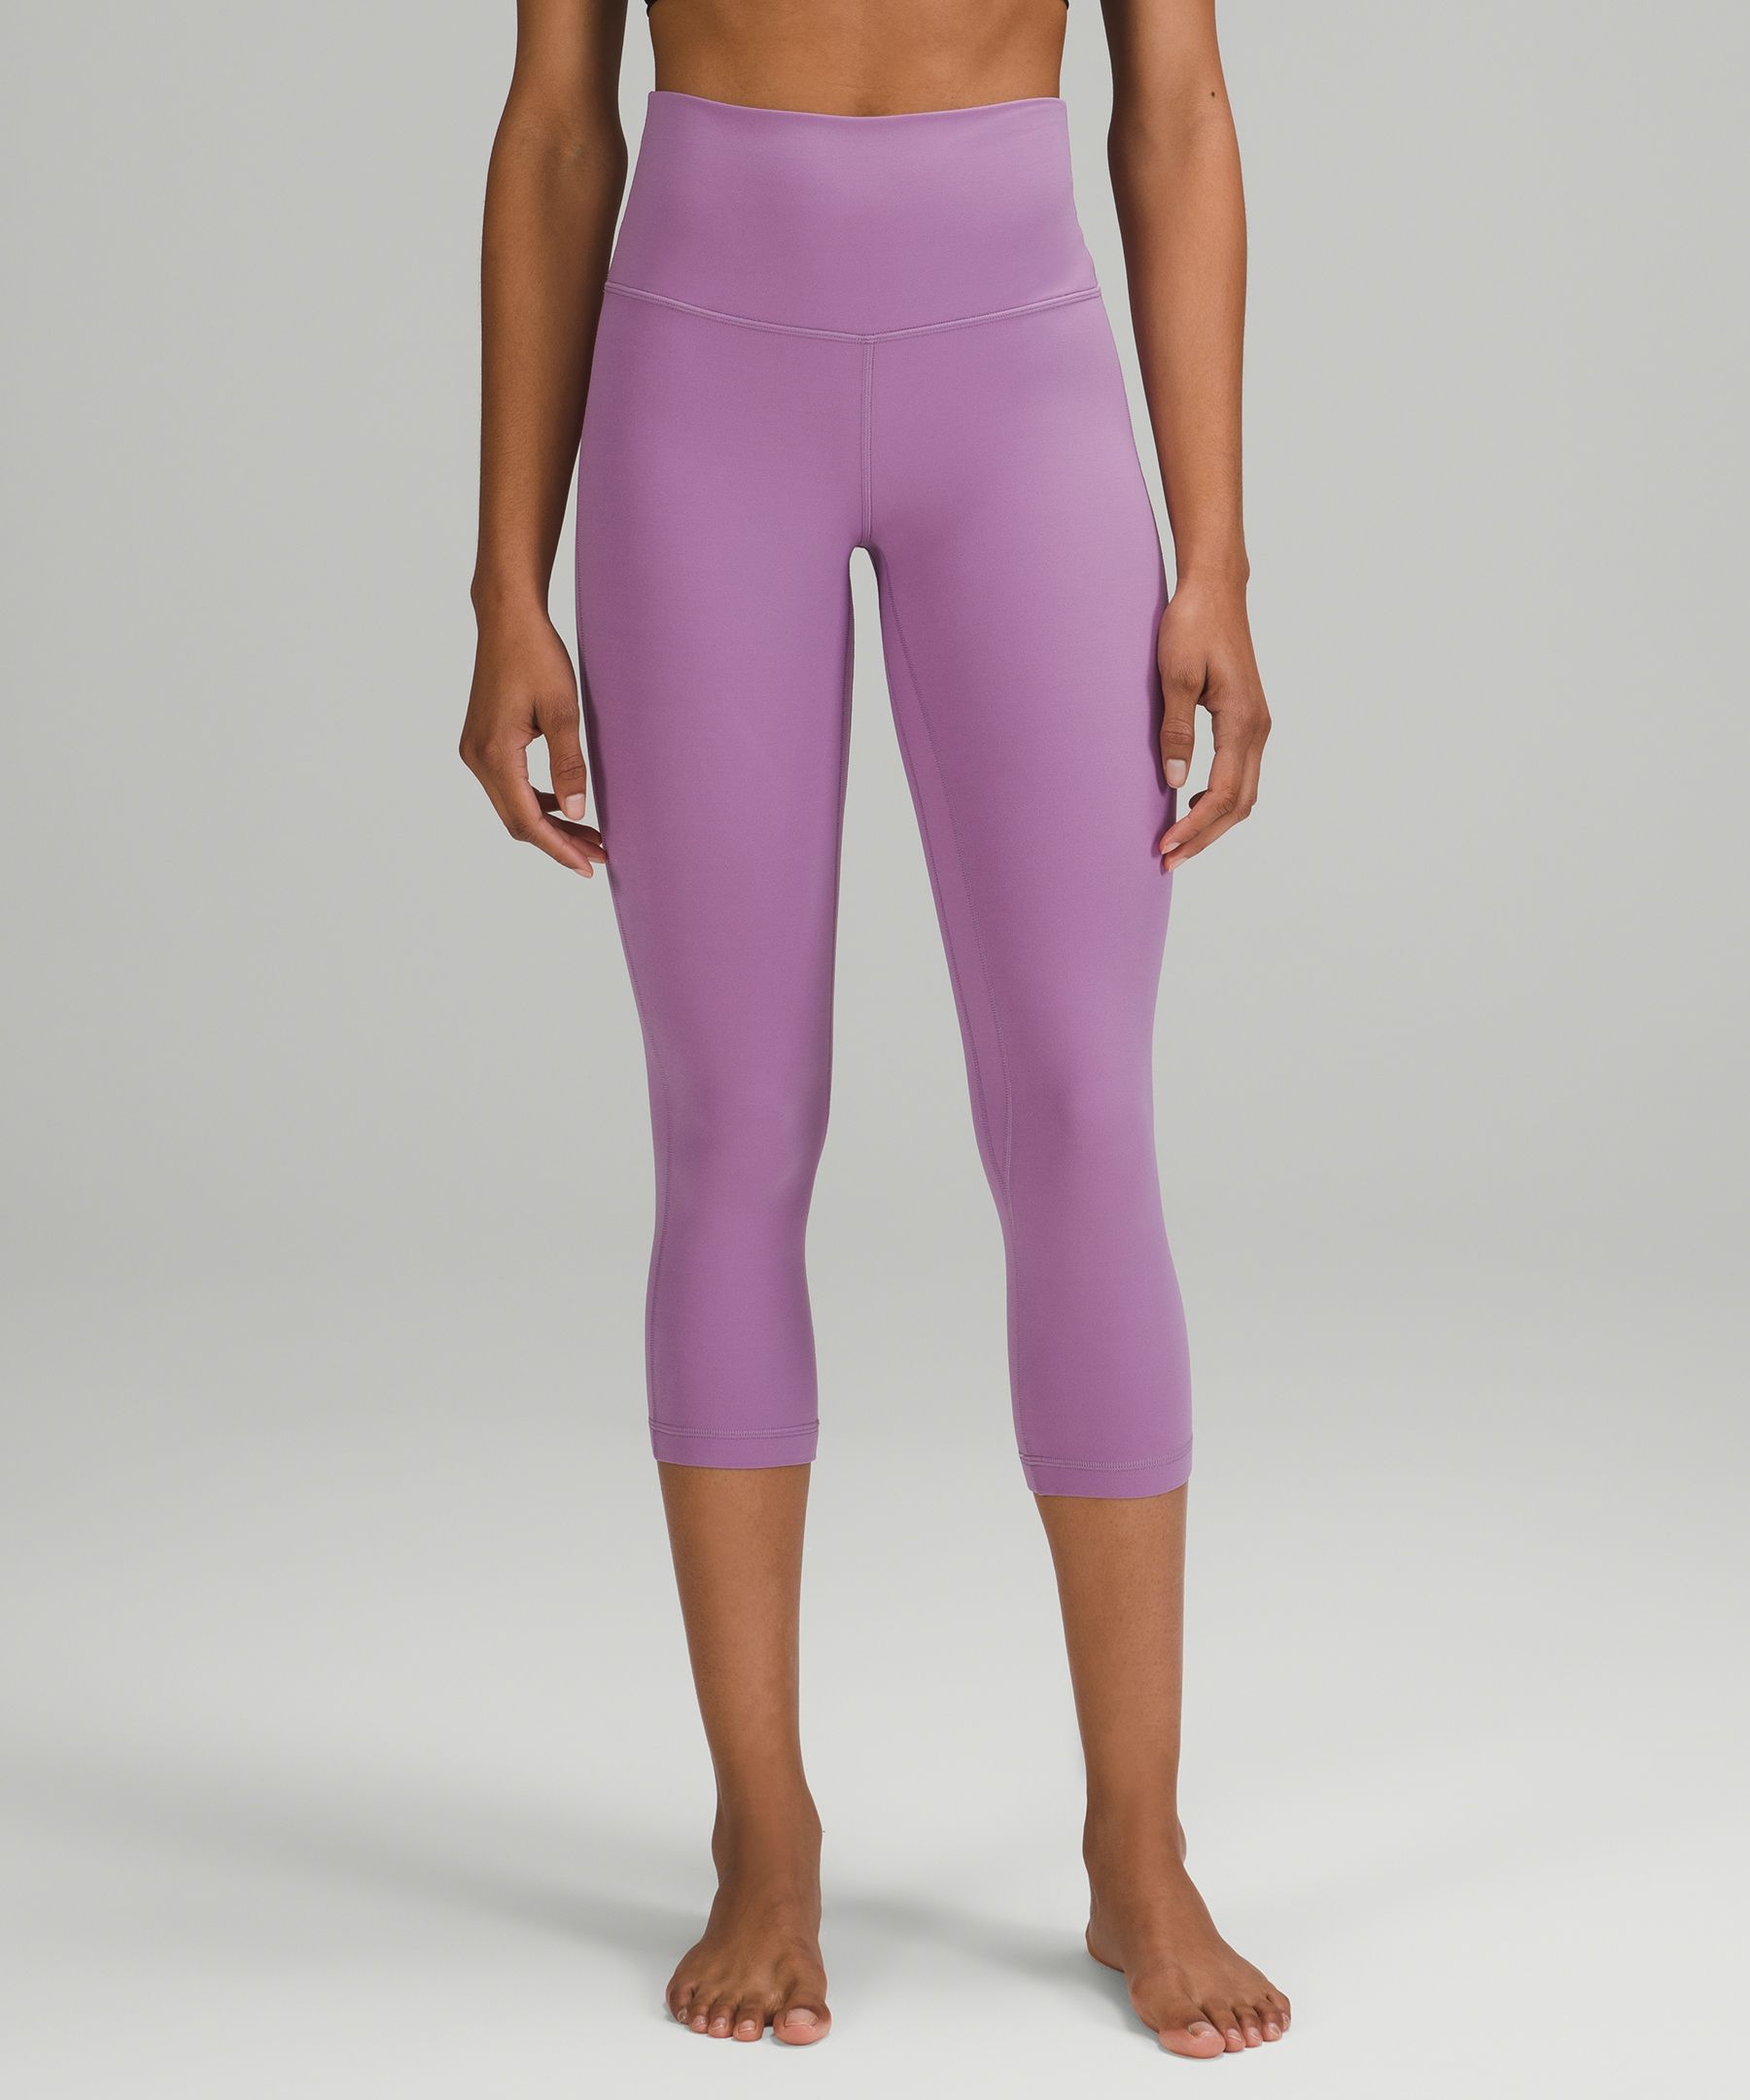 First time buying from lululemon and I'm loving this pink set